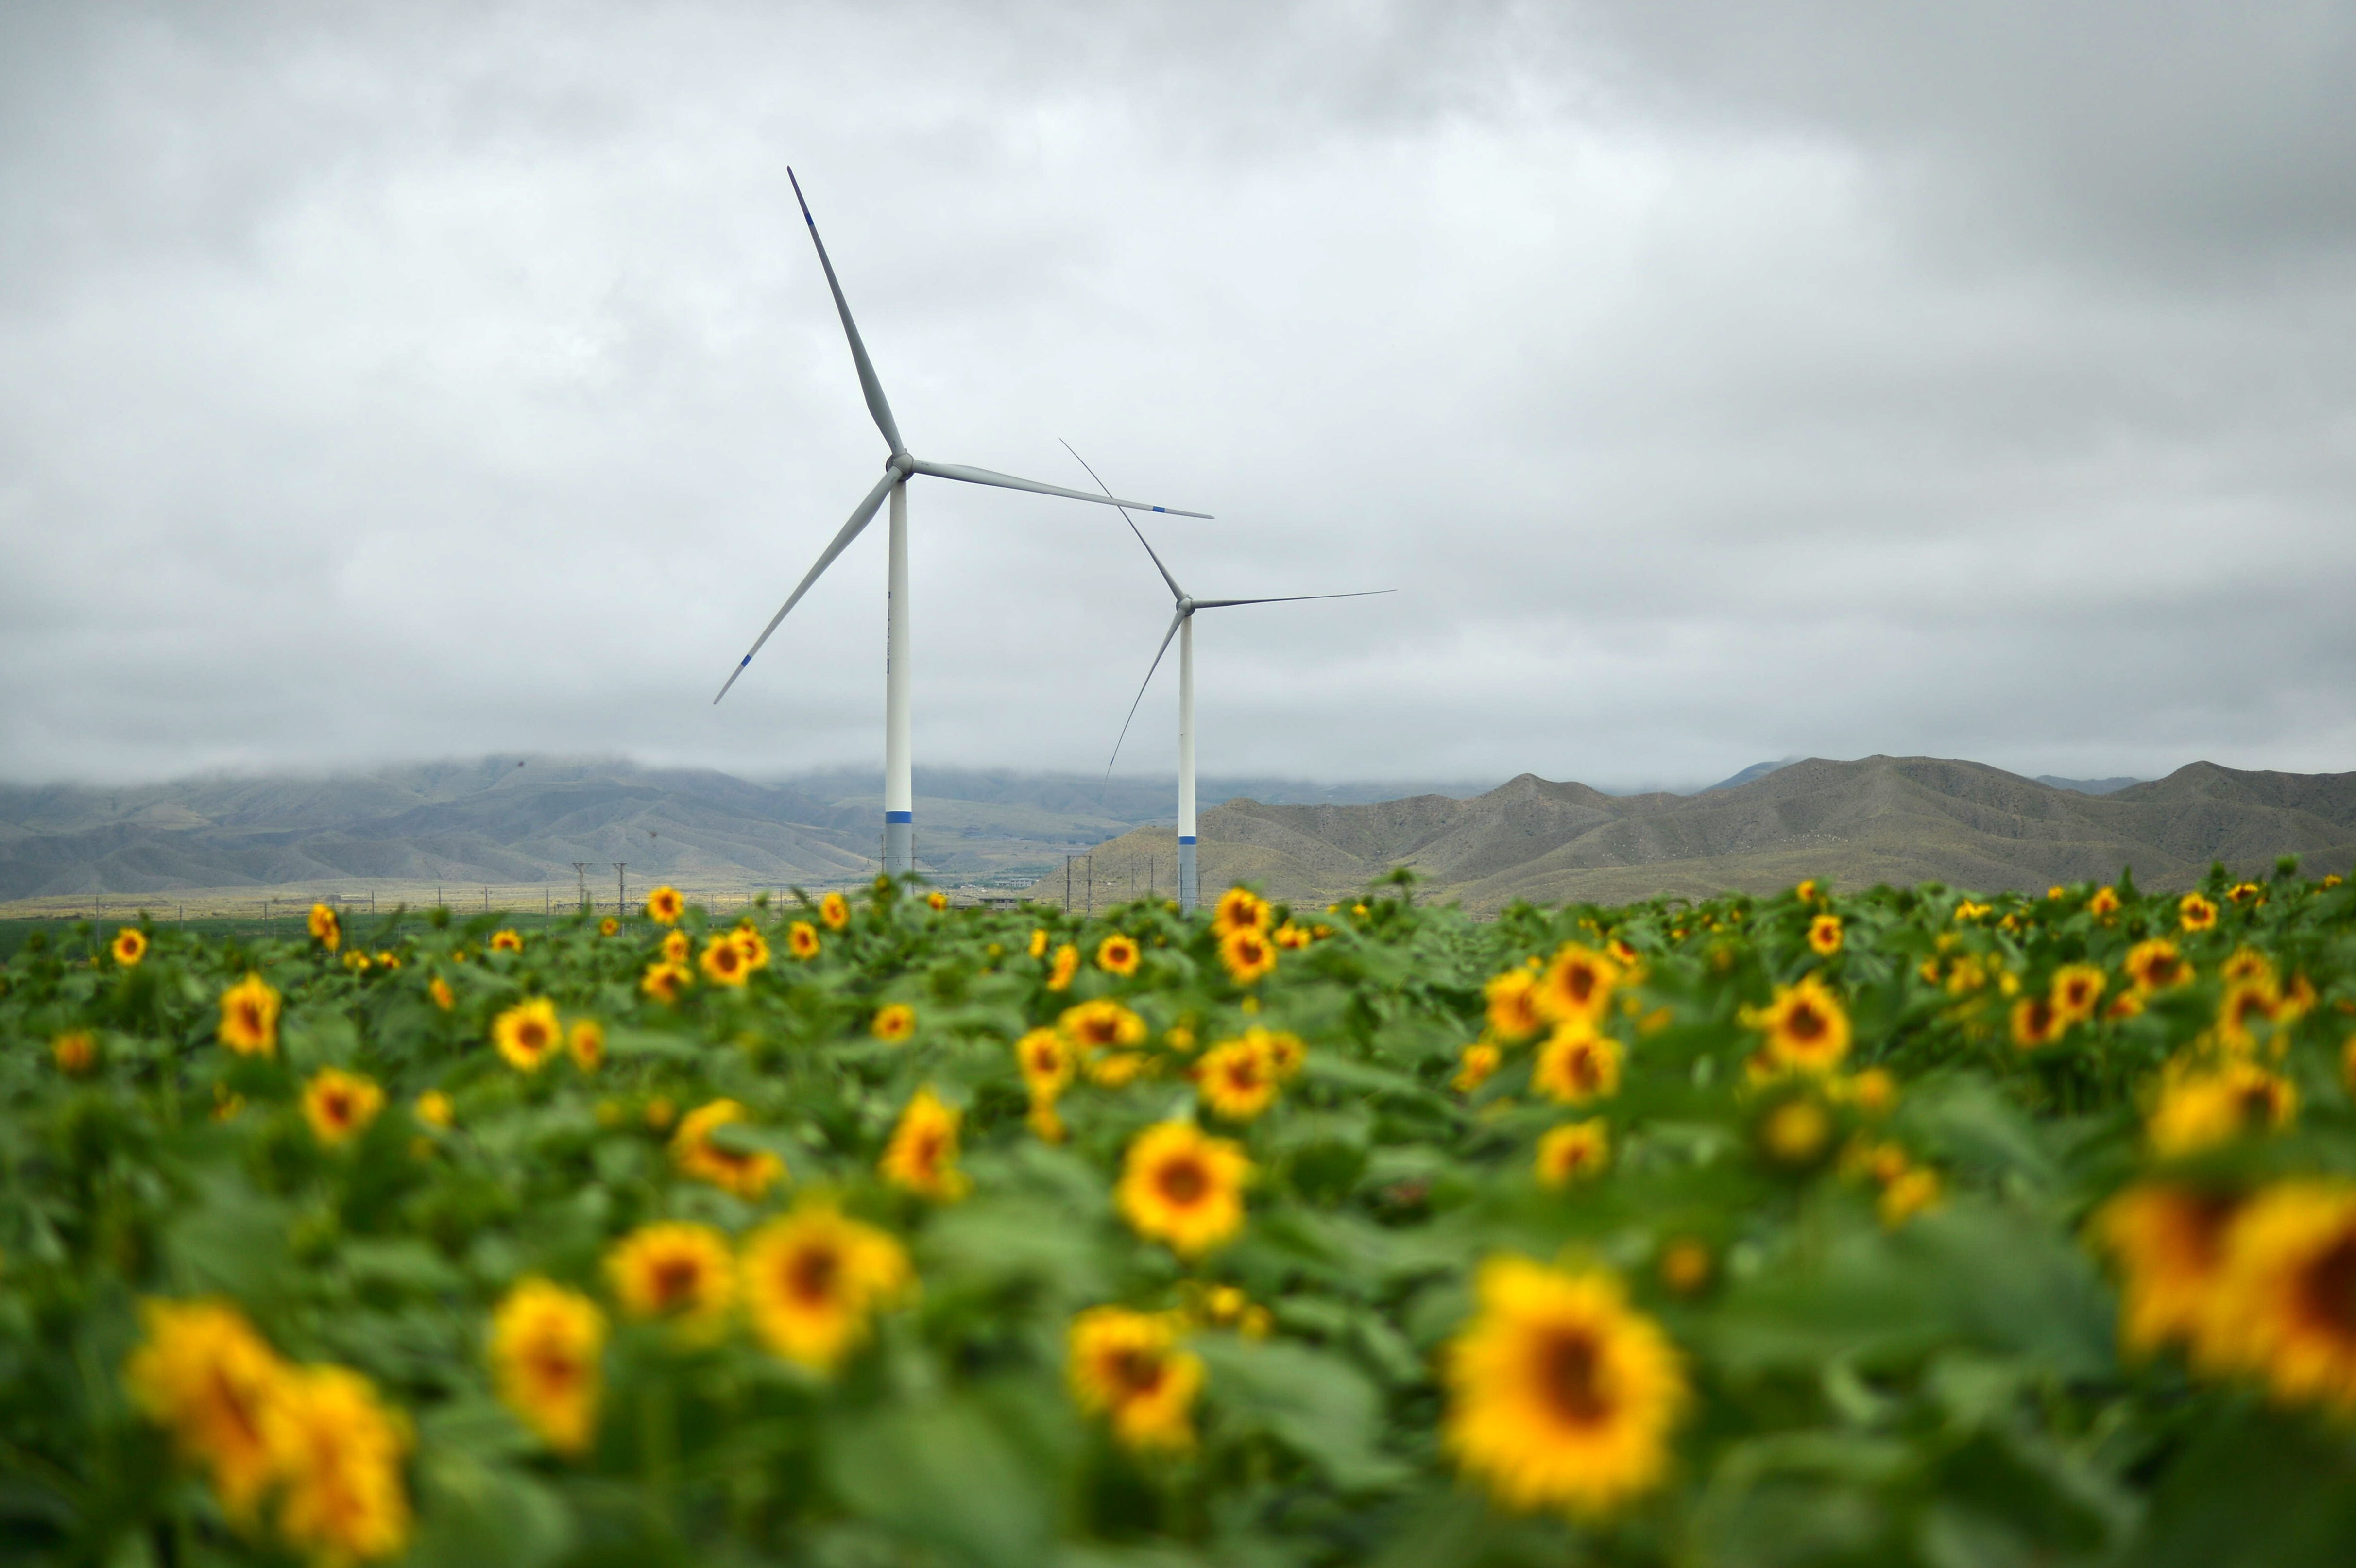 Wind turbines amid sunflowers in China’s Gansu province in August 2019. We must harness the capacity of sustainable energy to rebuild our societies and economies while protecting the environment. Photo: Xinhua